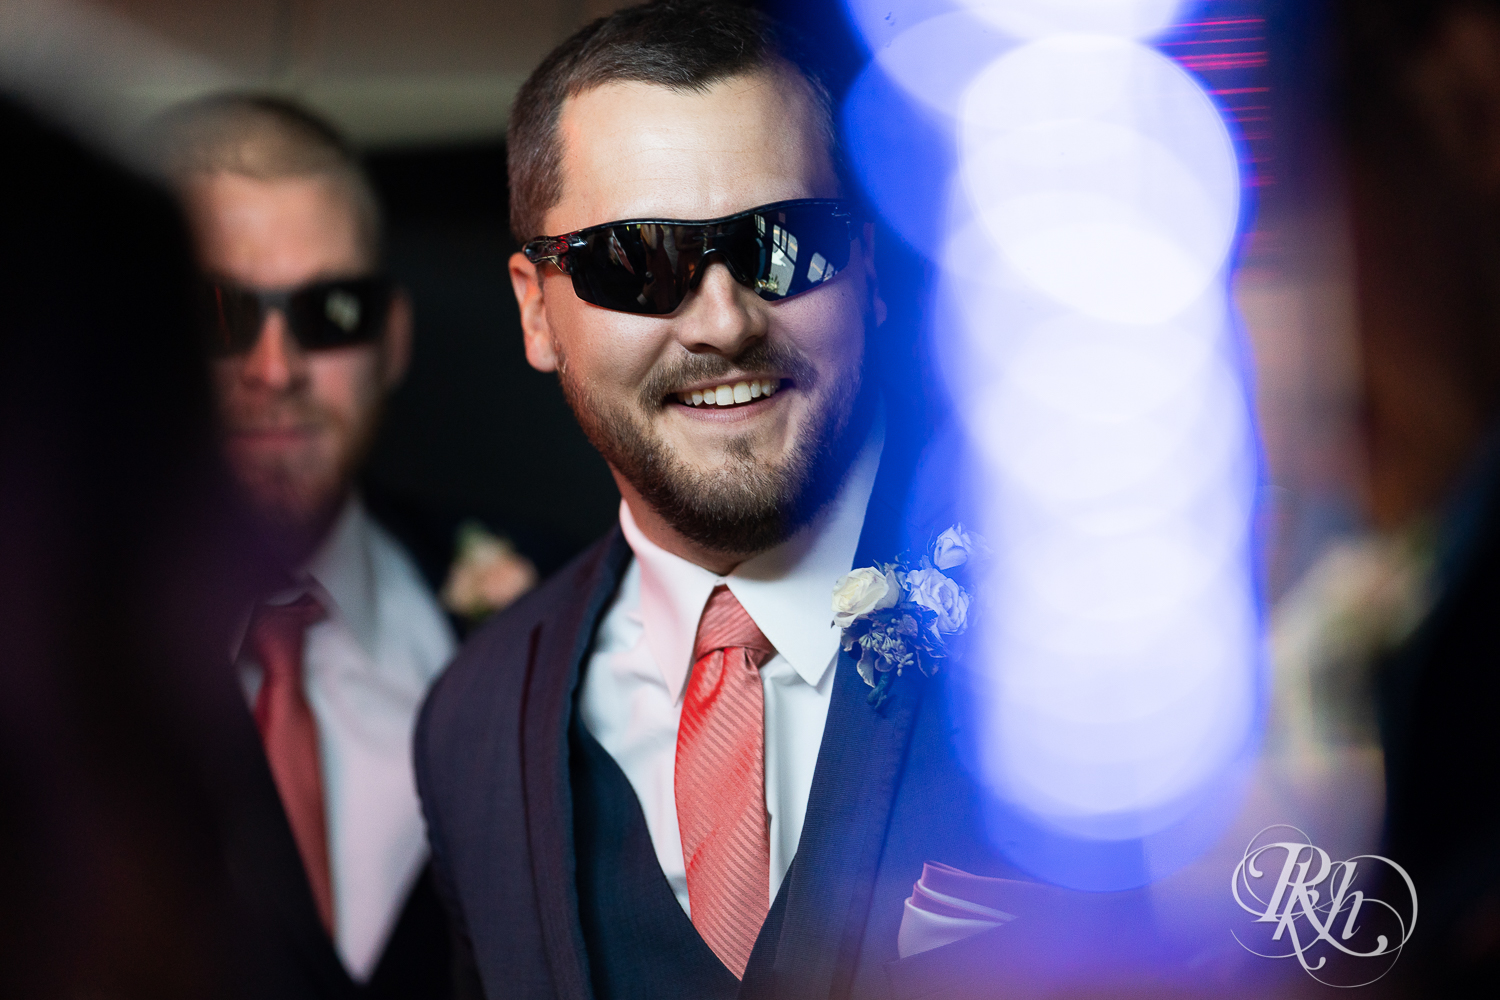 Groom in sunglasses on party bus in Minnesota.